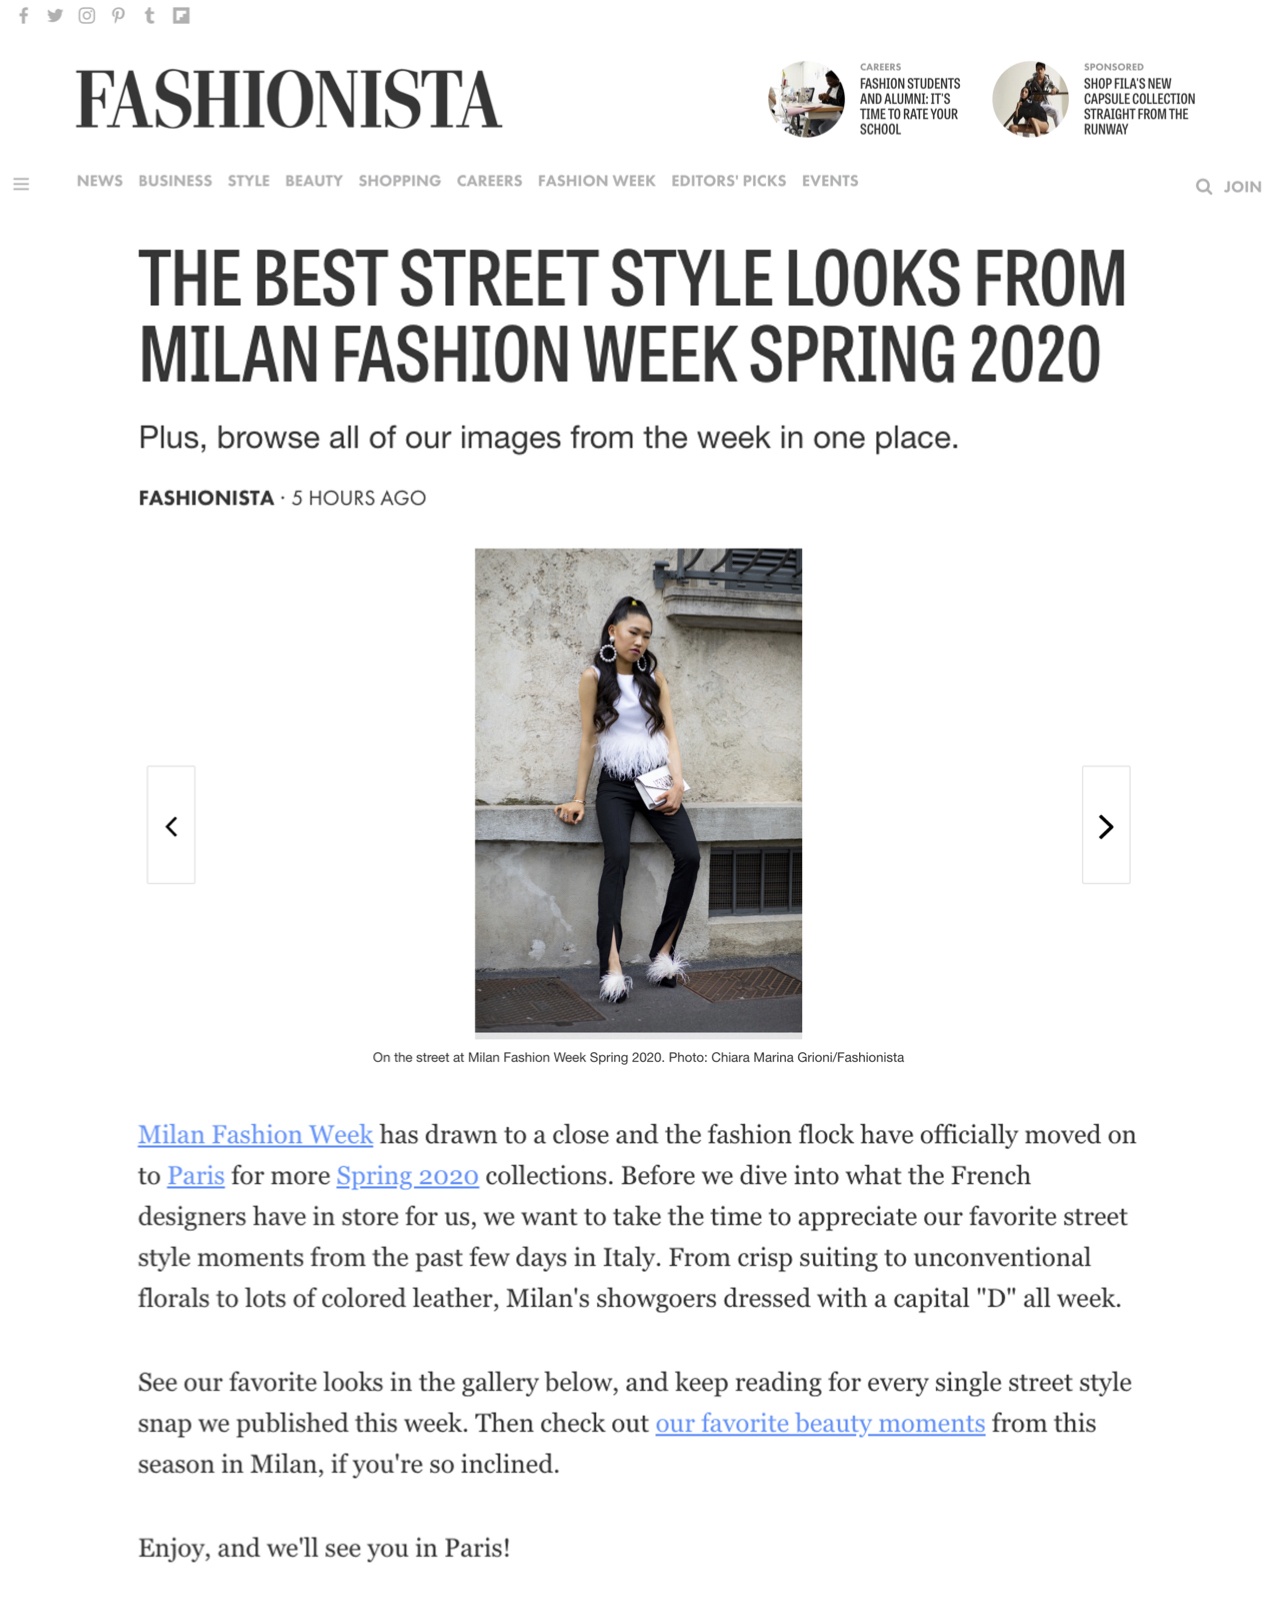 Fashionista: The Best Street Style Looks From Milan Fashion Week Spring 2020